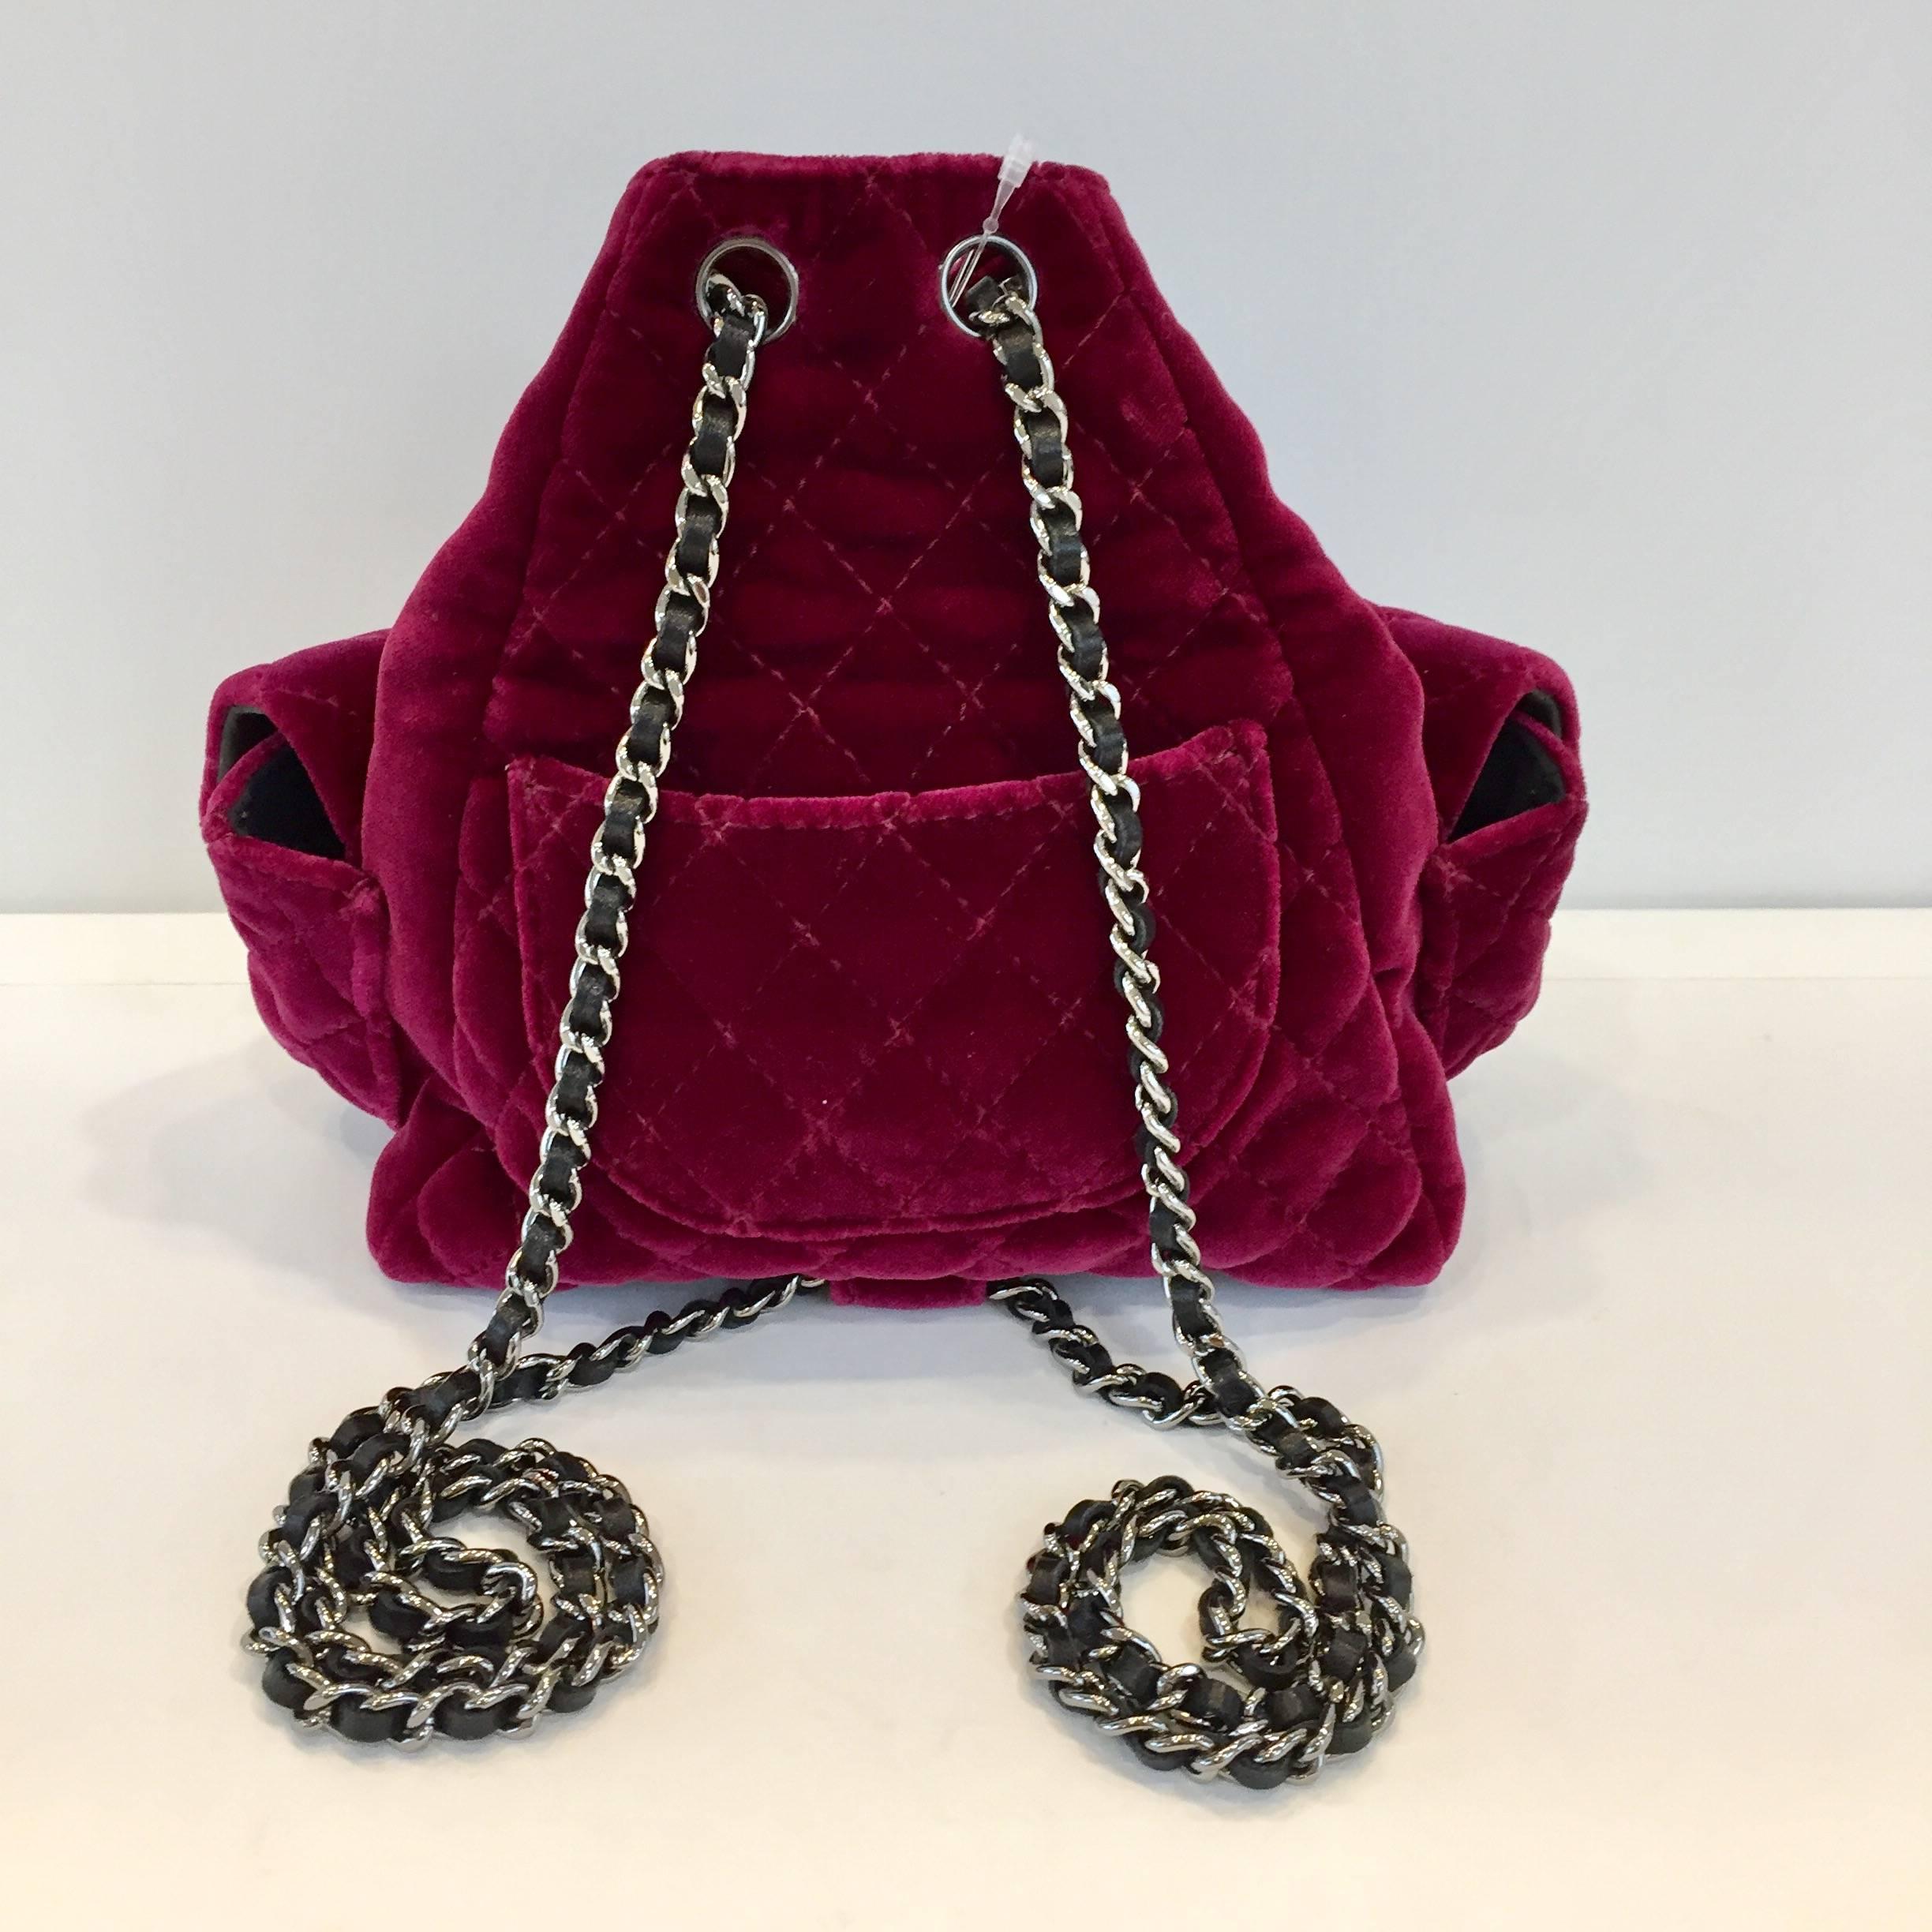 Stunning cherry velvet backpack by Chanel featuring two chain shoulderstraps and a front zipper, embellished with a logo charm. Two logo pockets to the front. 
Its conditions are perfect and its meaurements are: 17 cm x 20 cm x 12 cm. It comes with